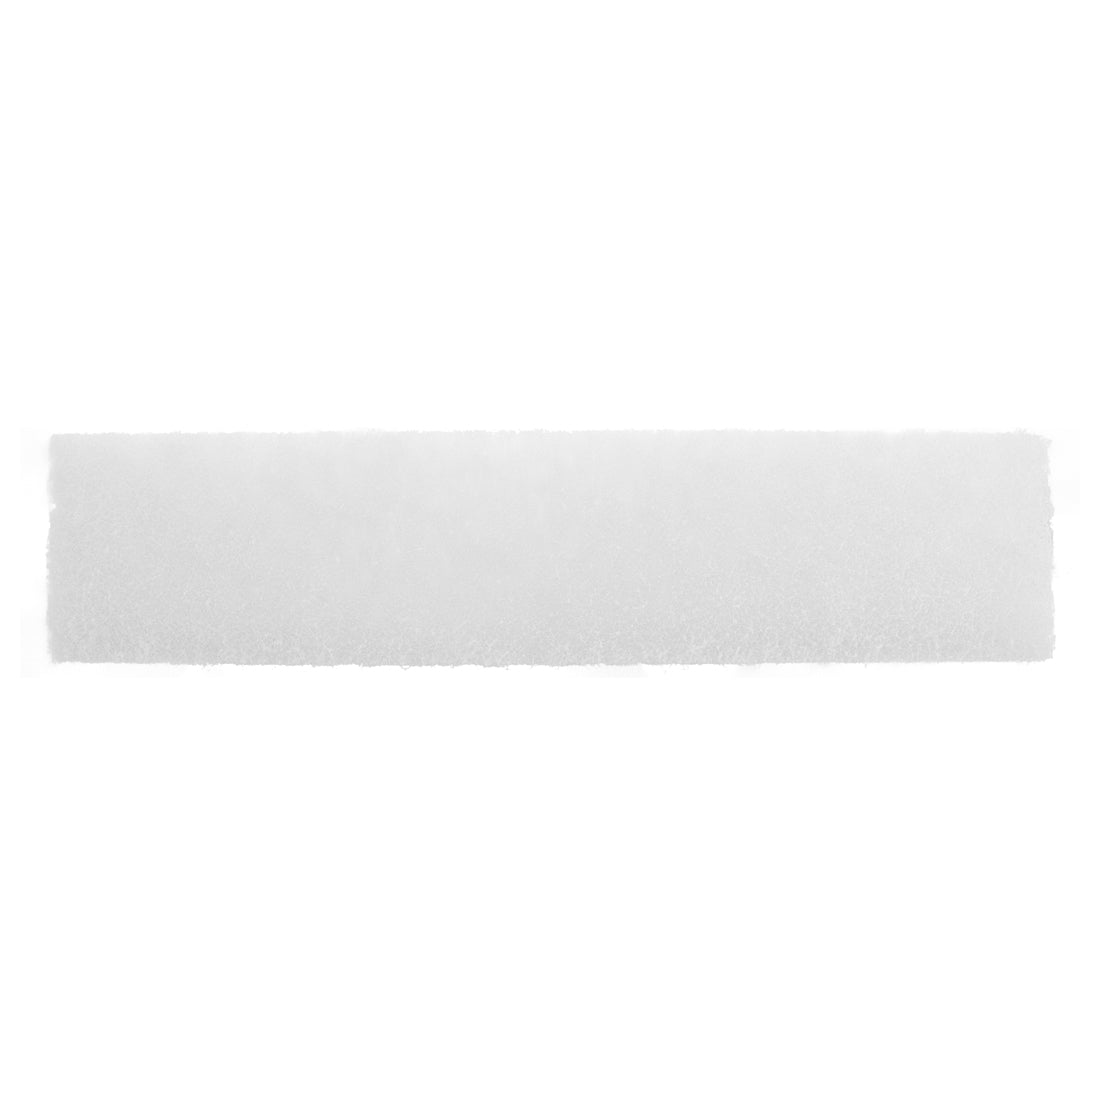 Tucker Alpha Scrubber Replacement Pads - Single Pad Front View